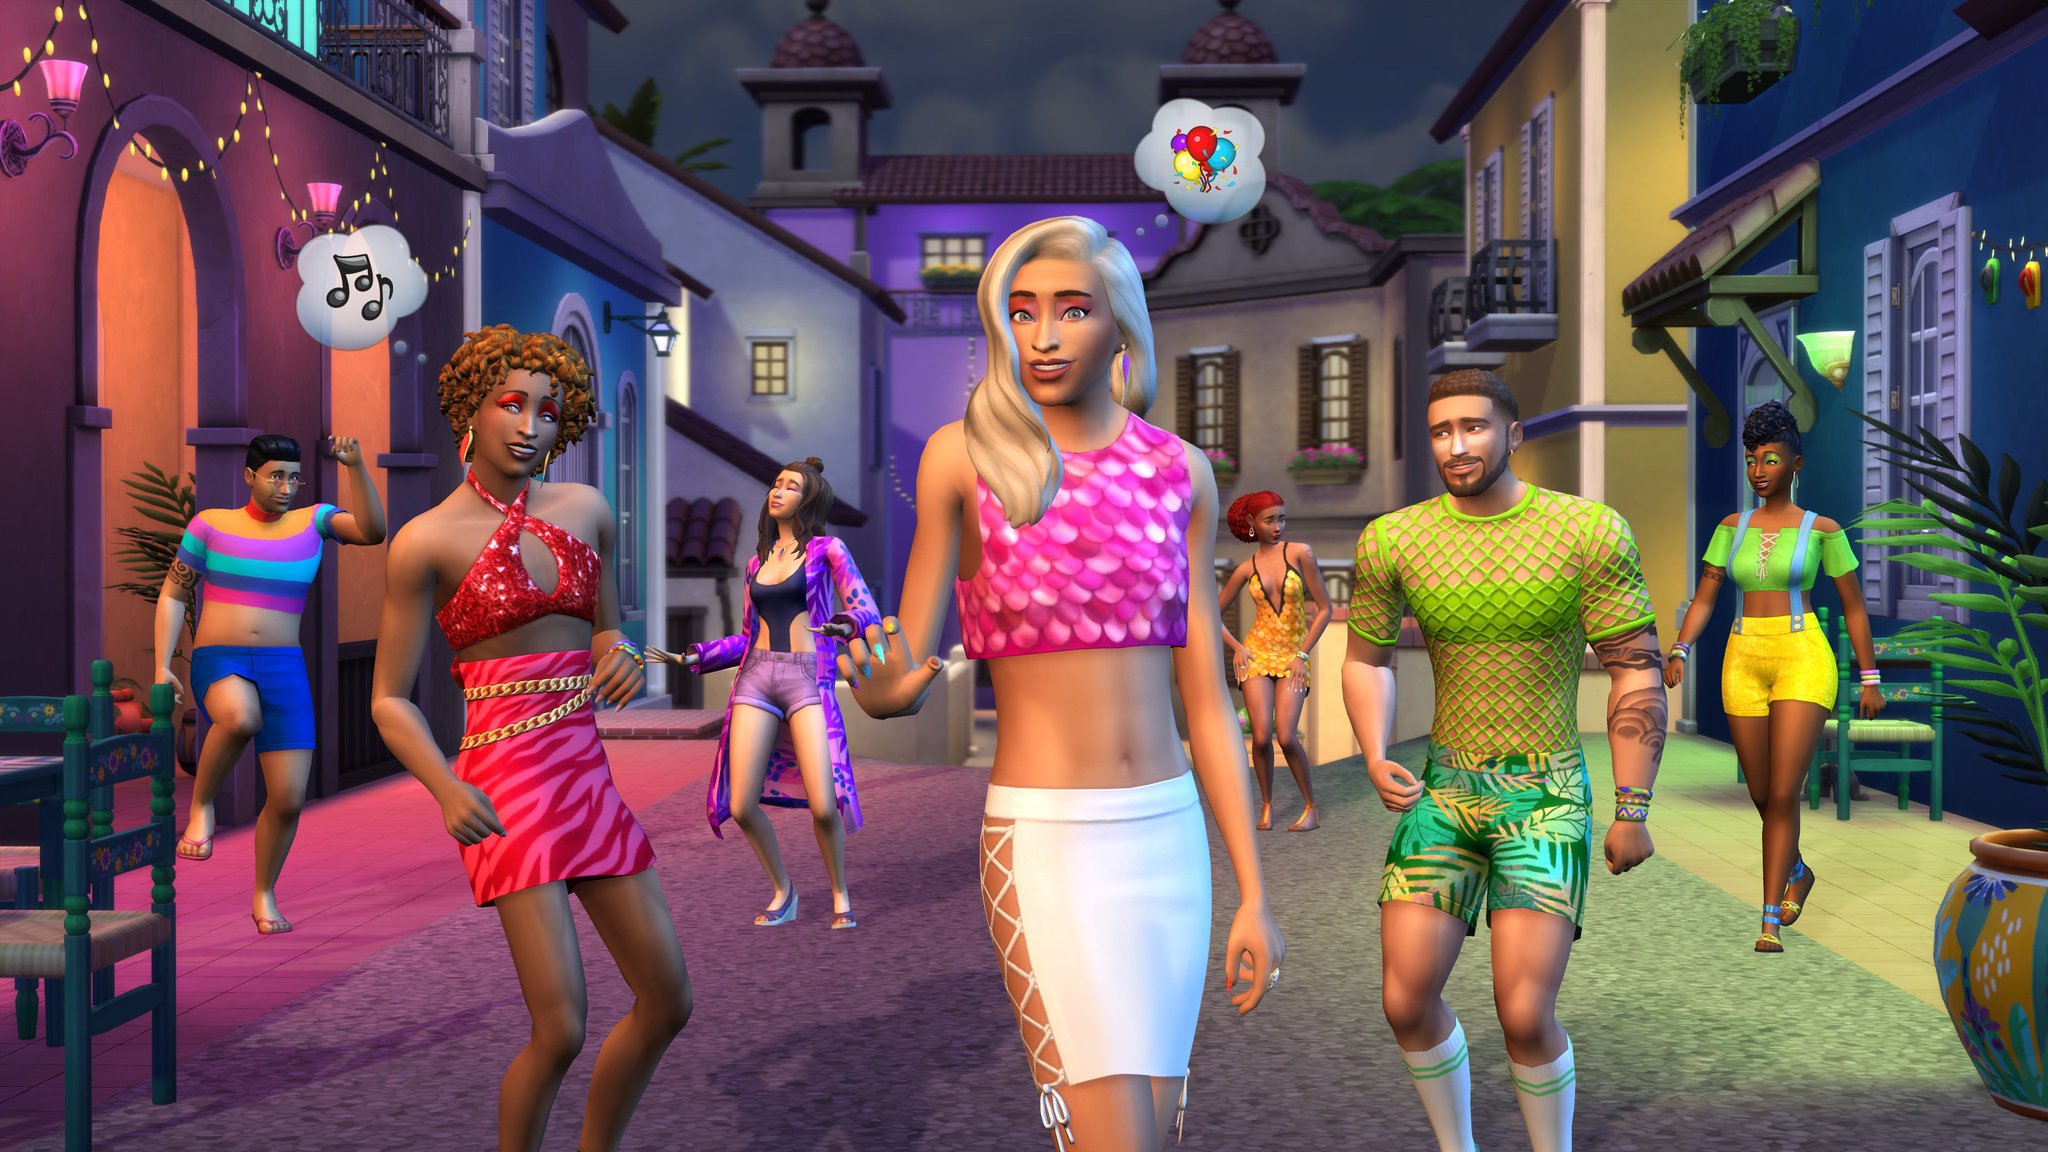 The Next DLC For The Sims 4 Will Be Carnaval Streetwear